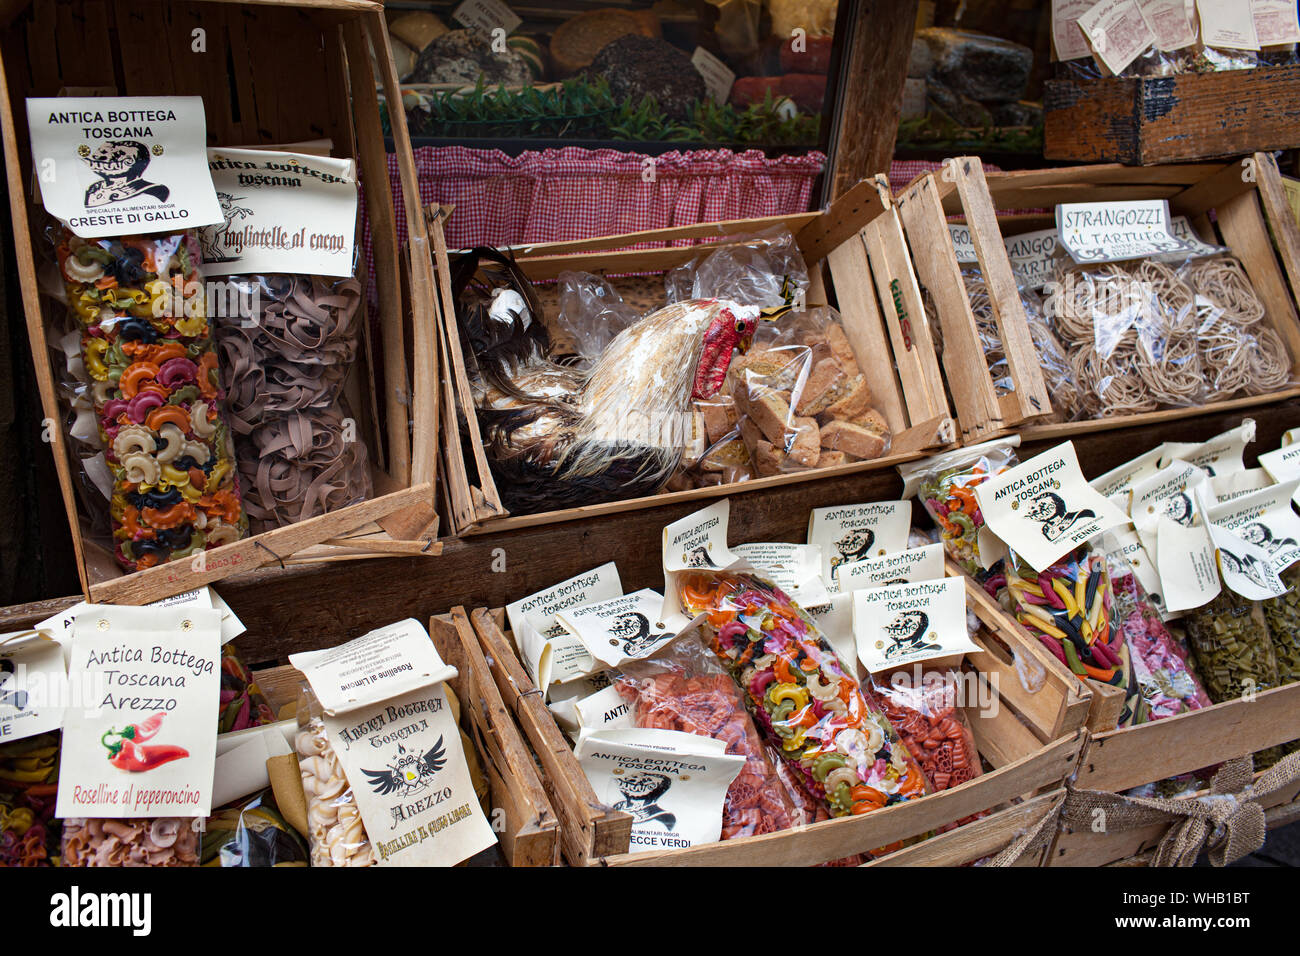 AREZZO, TUSCANY, ITALY - JANUARY 10, 2016: Typical Italian artisanal pasta, spices and cookies at Antica Bottega Toscana one of the oldest shops Stock Photo